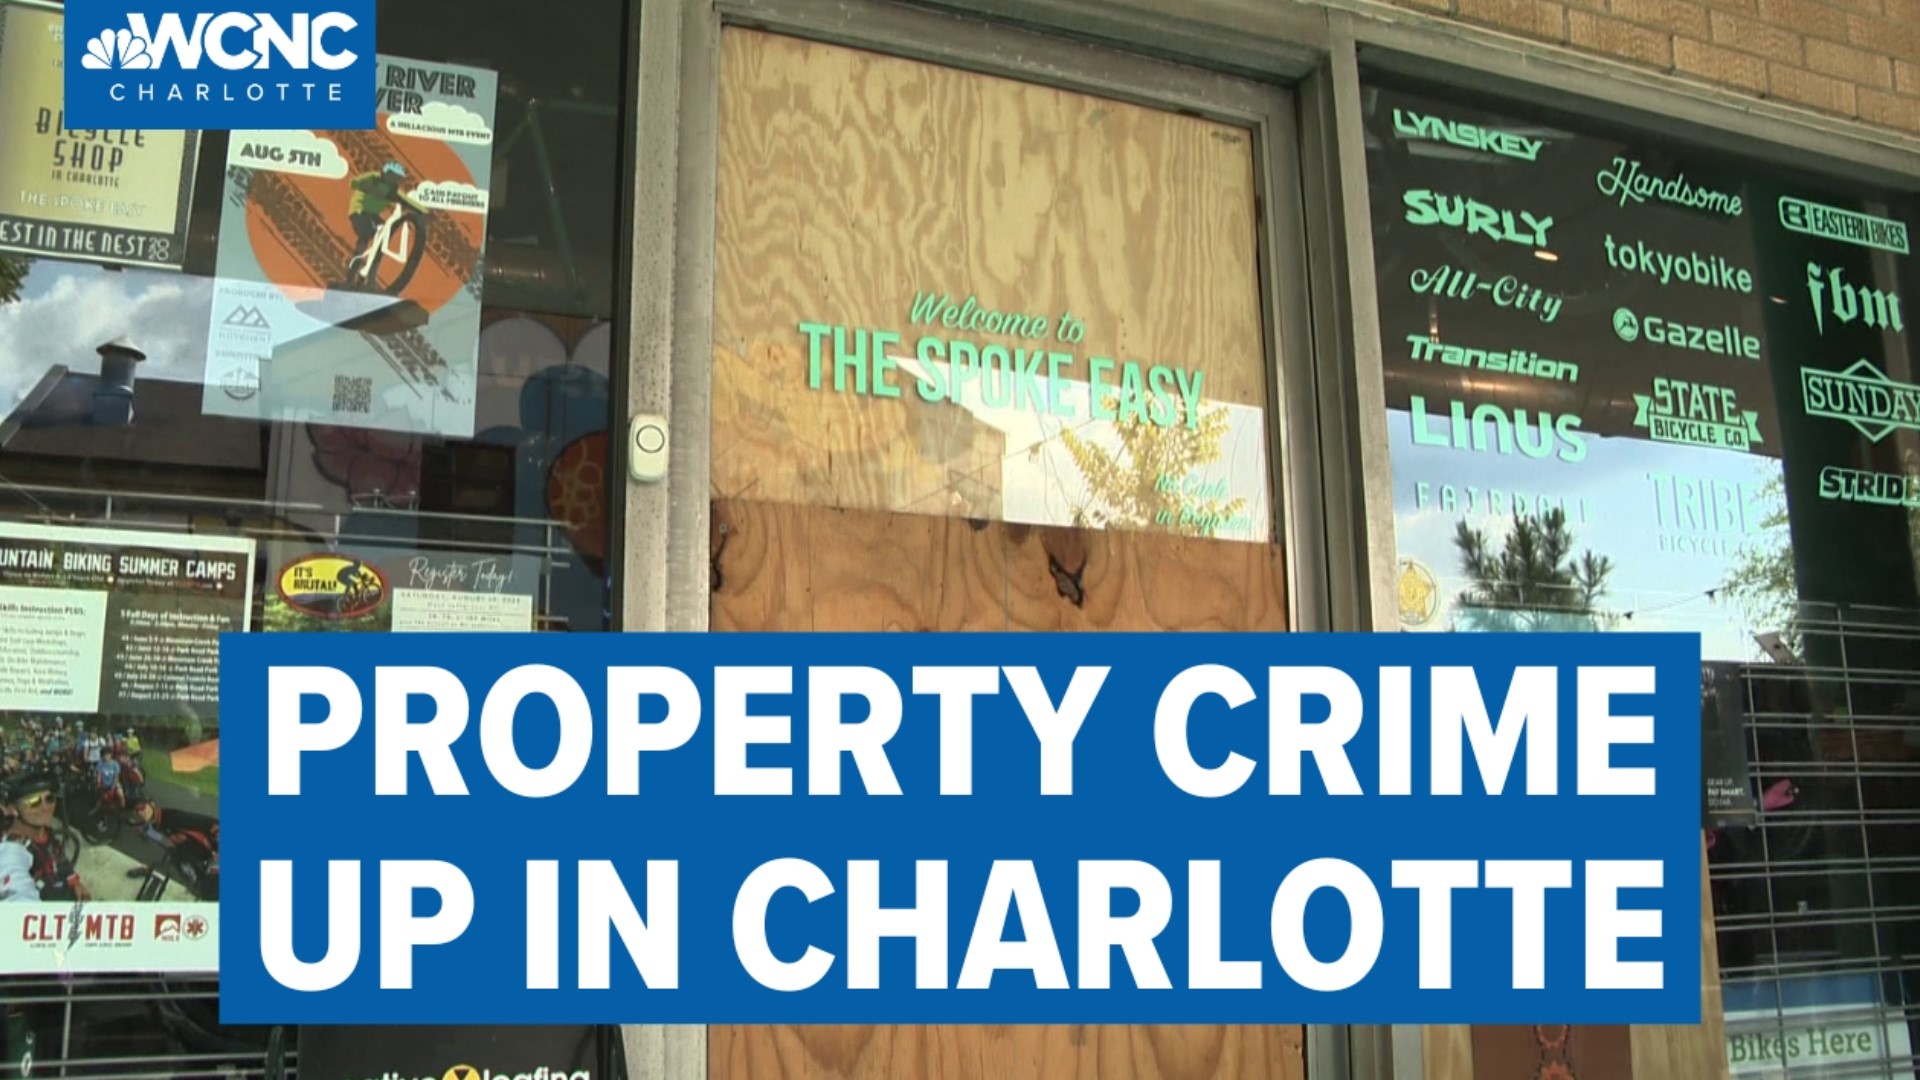 CMPD reported property crime is up 16% from last year as thousands of people fall victim to burglaries, thefts, and car break-ins.